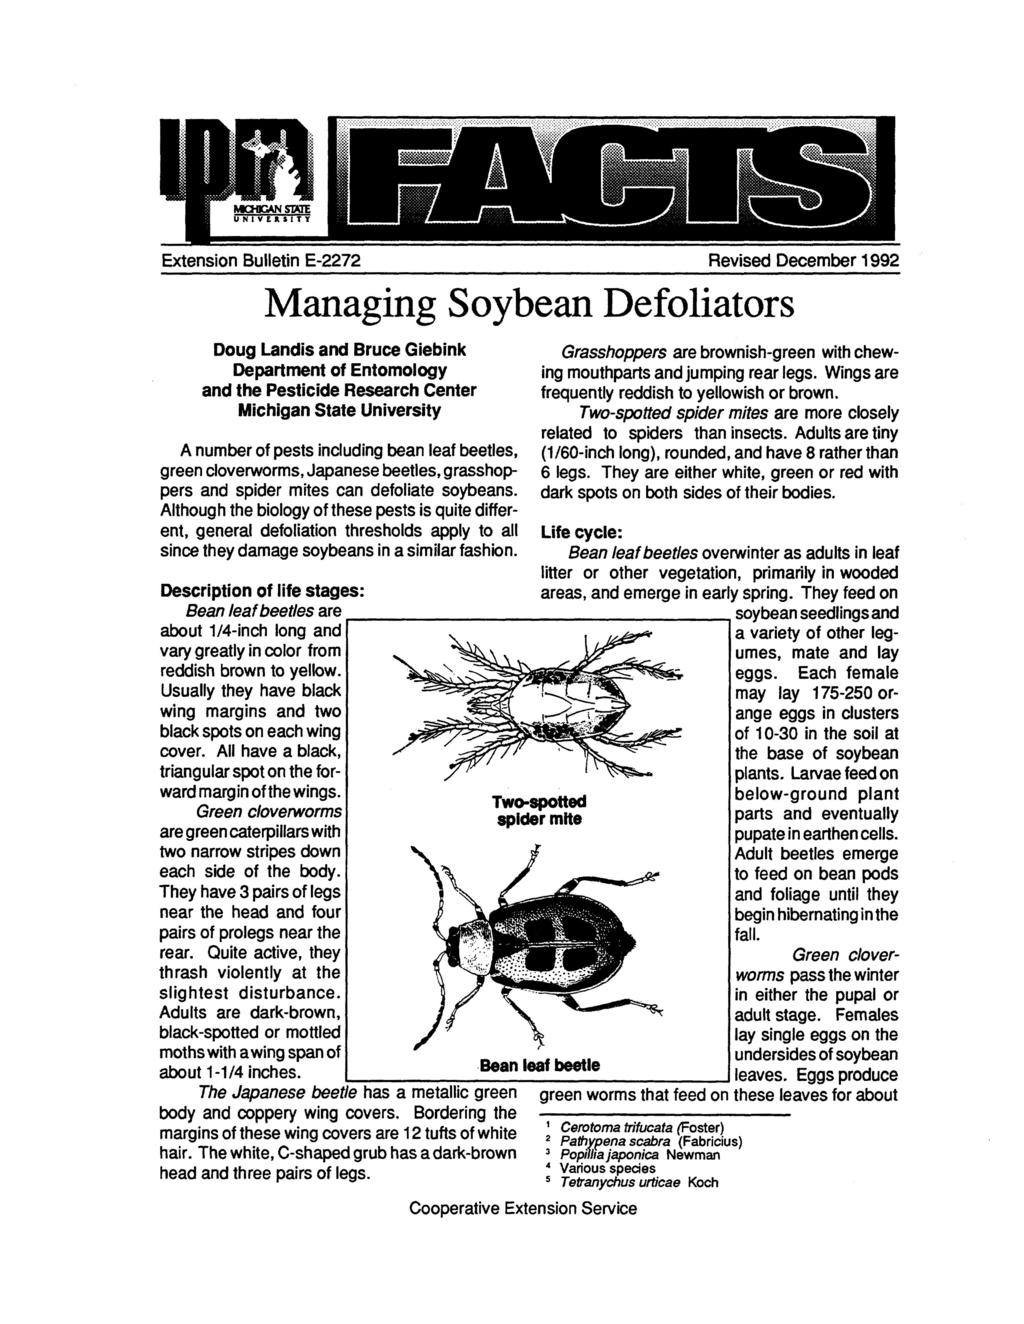 Extension Bulletin E-2272 Revised December 1992 Managing Soybean Defoliators Doug Landis and Bruce Giebink Department of Entomology and the Pesticide Research Center Michigan State University